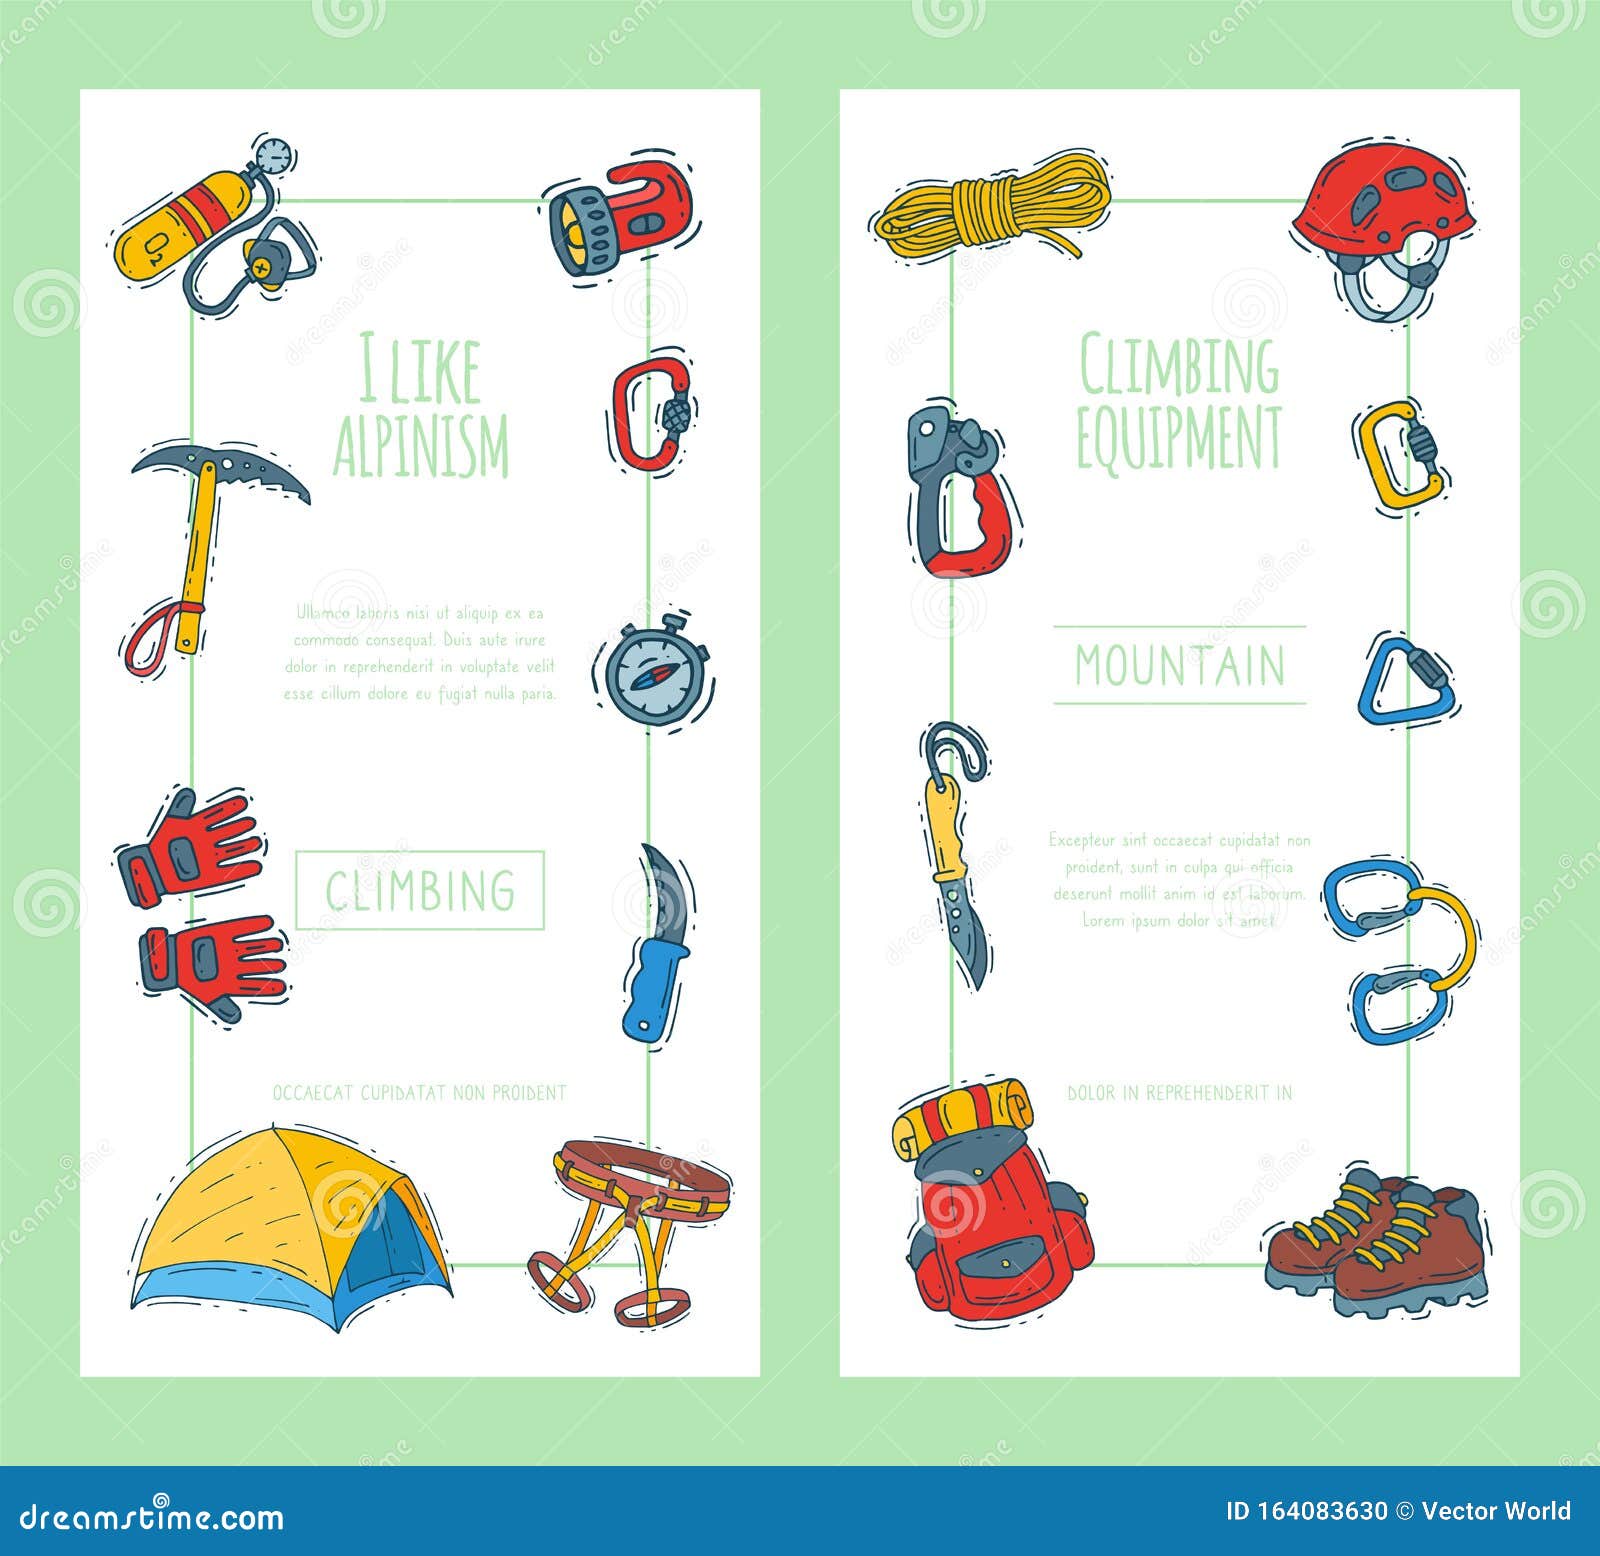 hiking equipment  . mountain climbing, alpinism and mountaineering cartoon icons templates for flyers